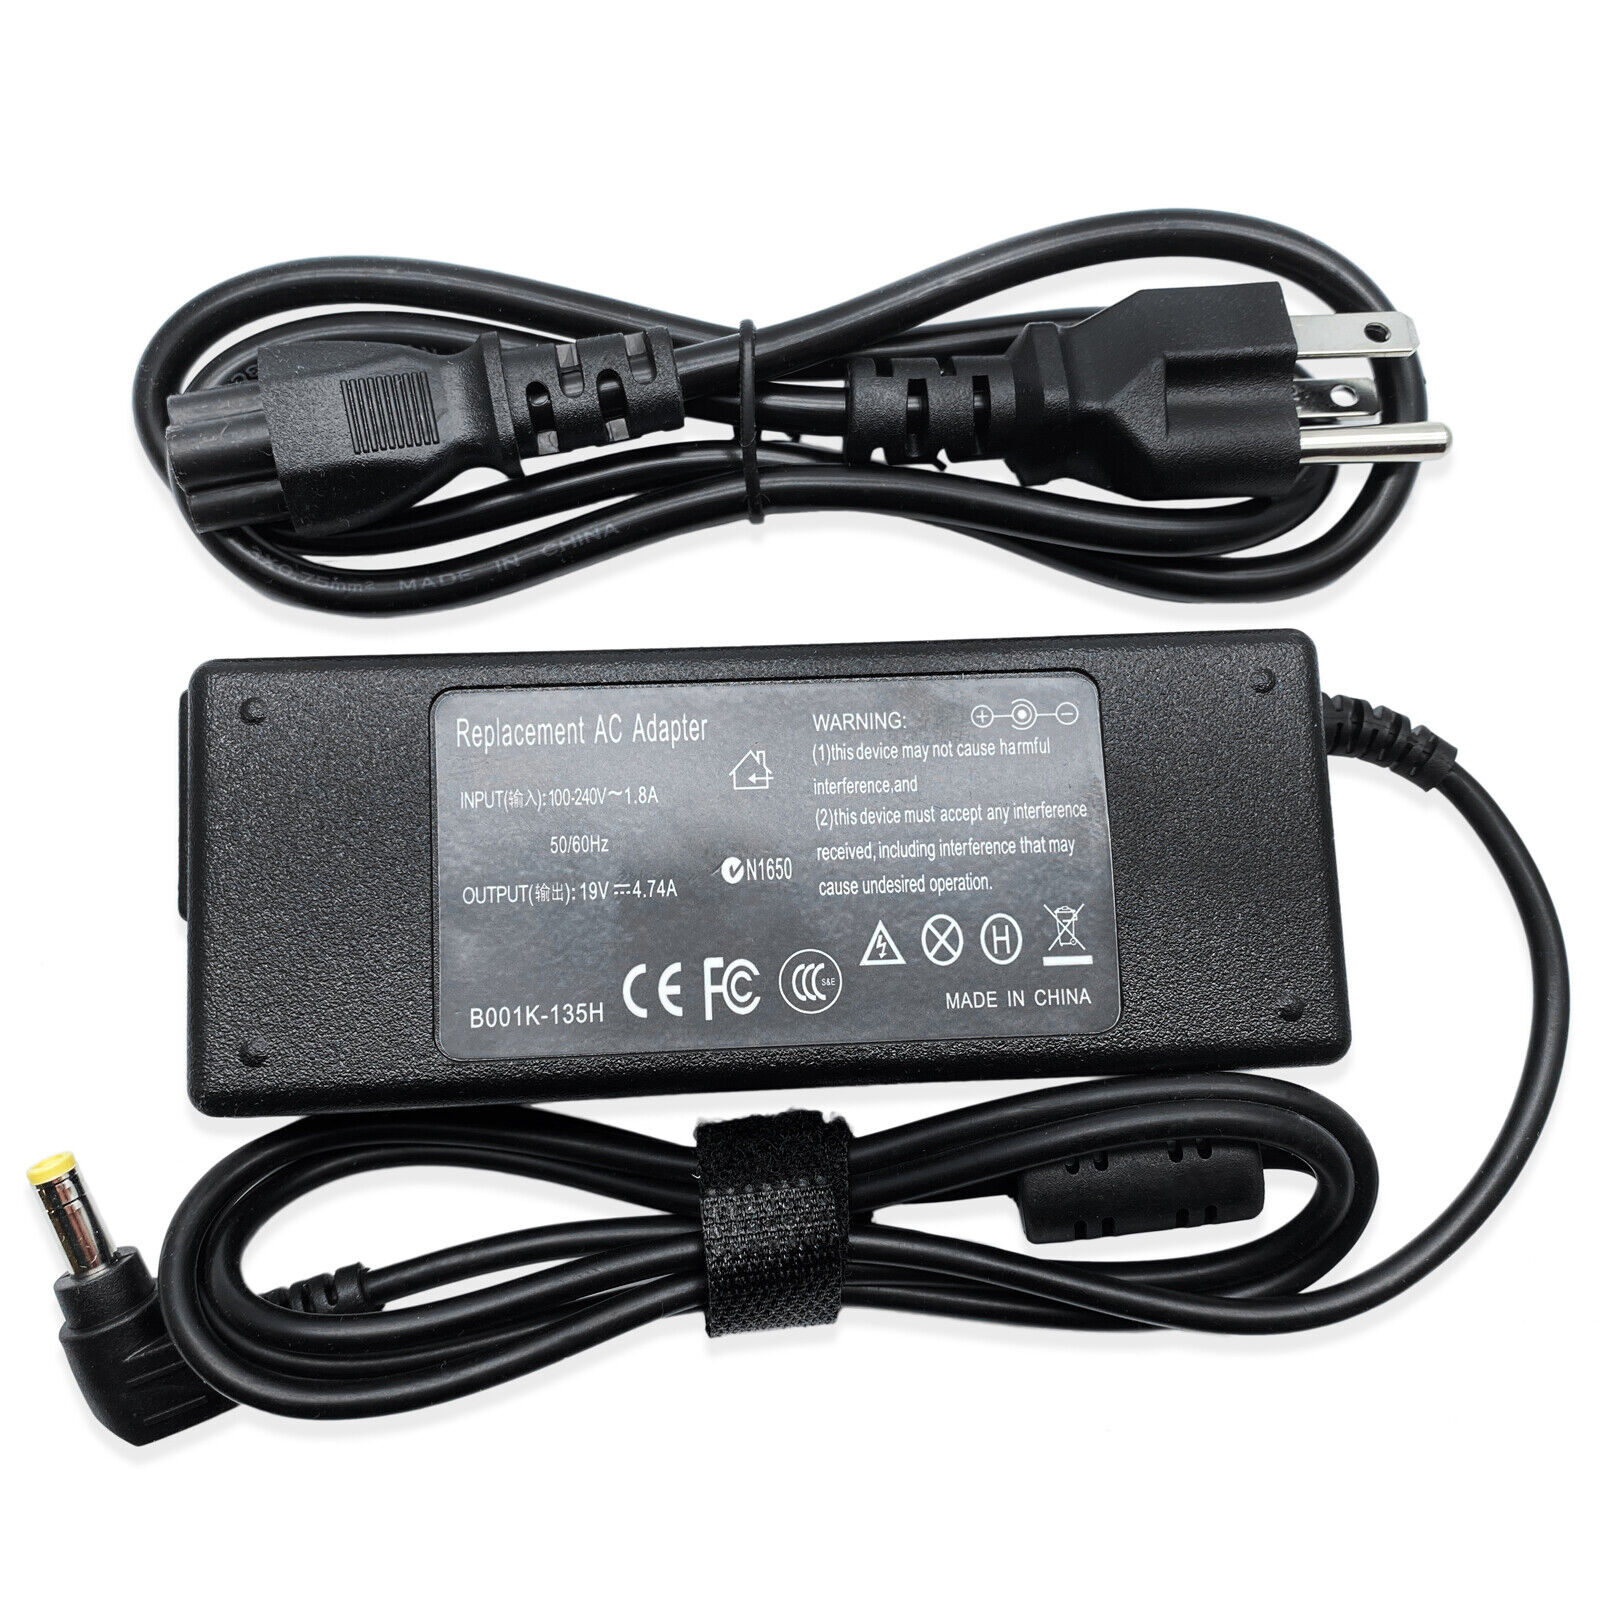 90W New AC Adapter Charger For Compaq Presario 2100 2500 2800 Power Supply Cord